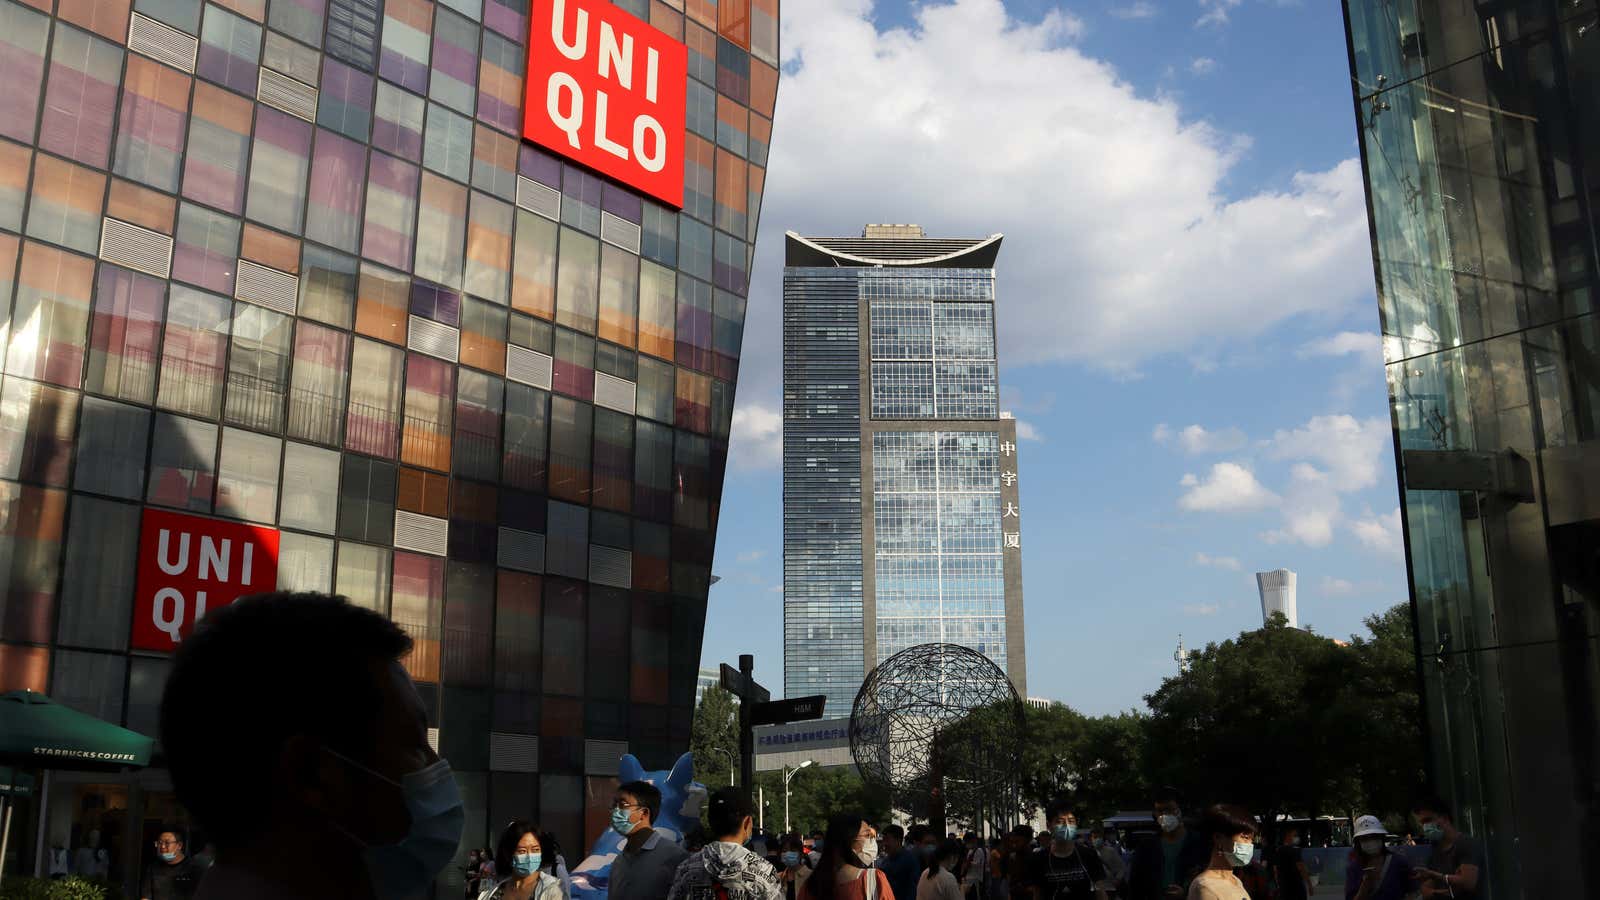 Uniqlo’s strength in China and other Asian markets has investors feeling confident about the brand.